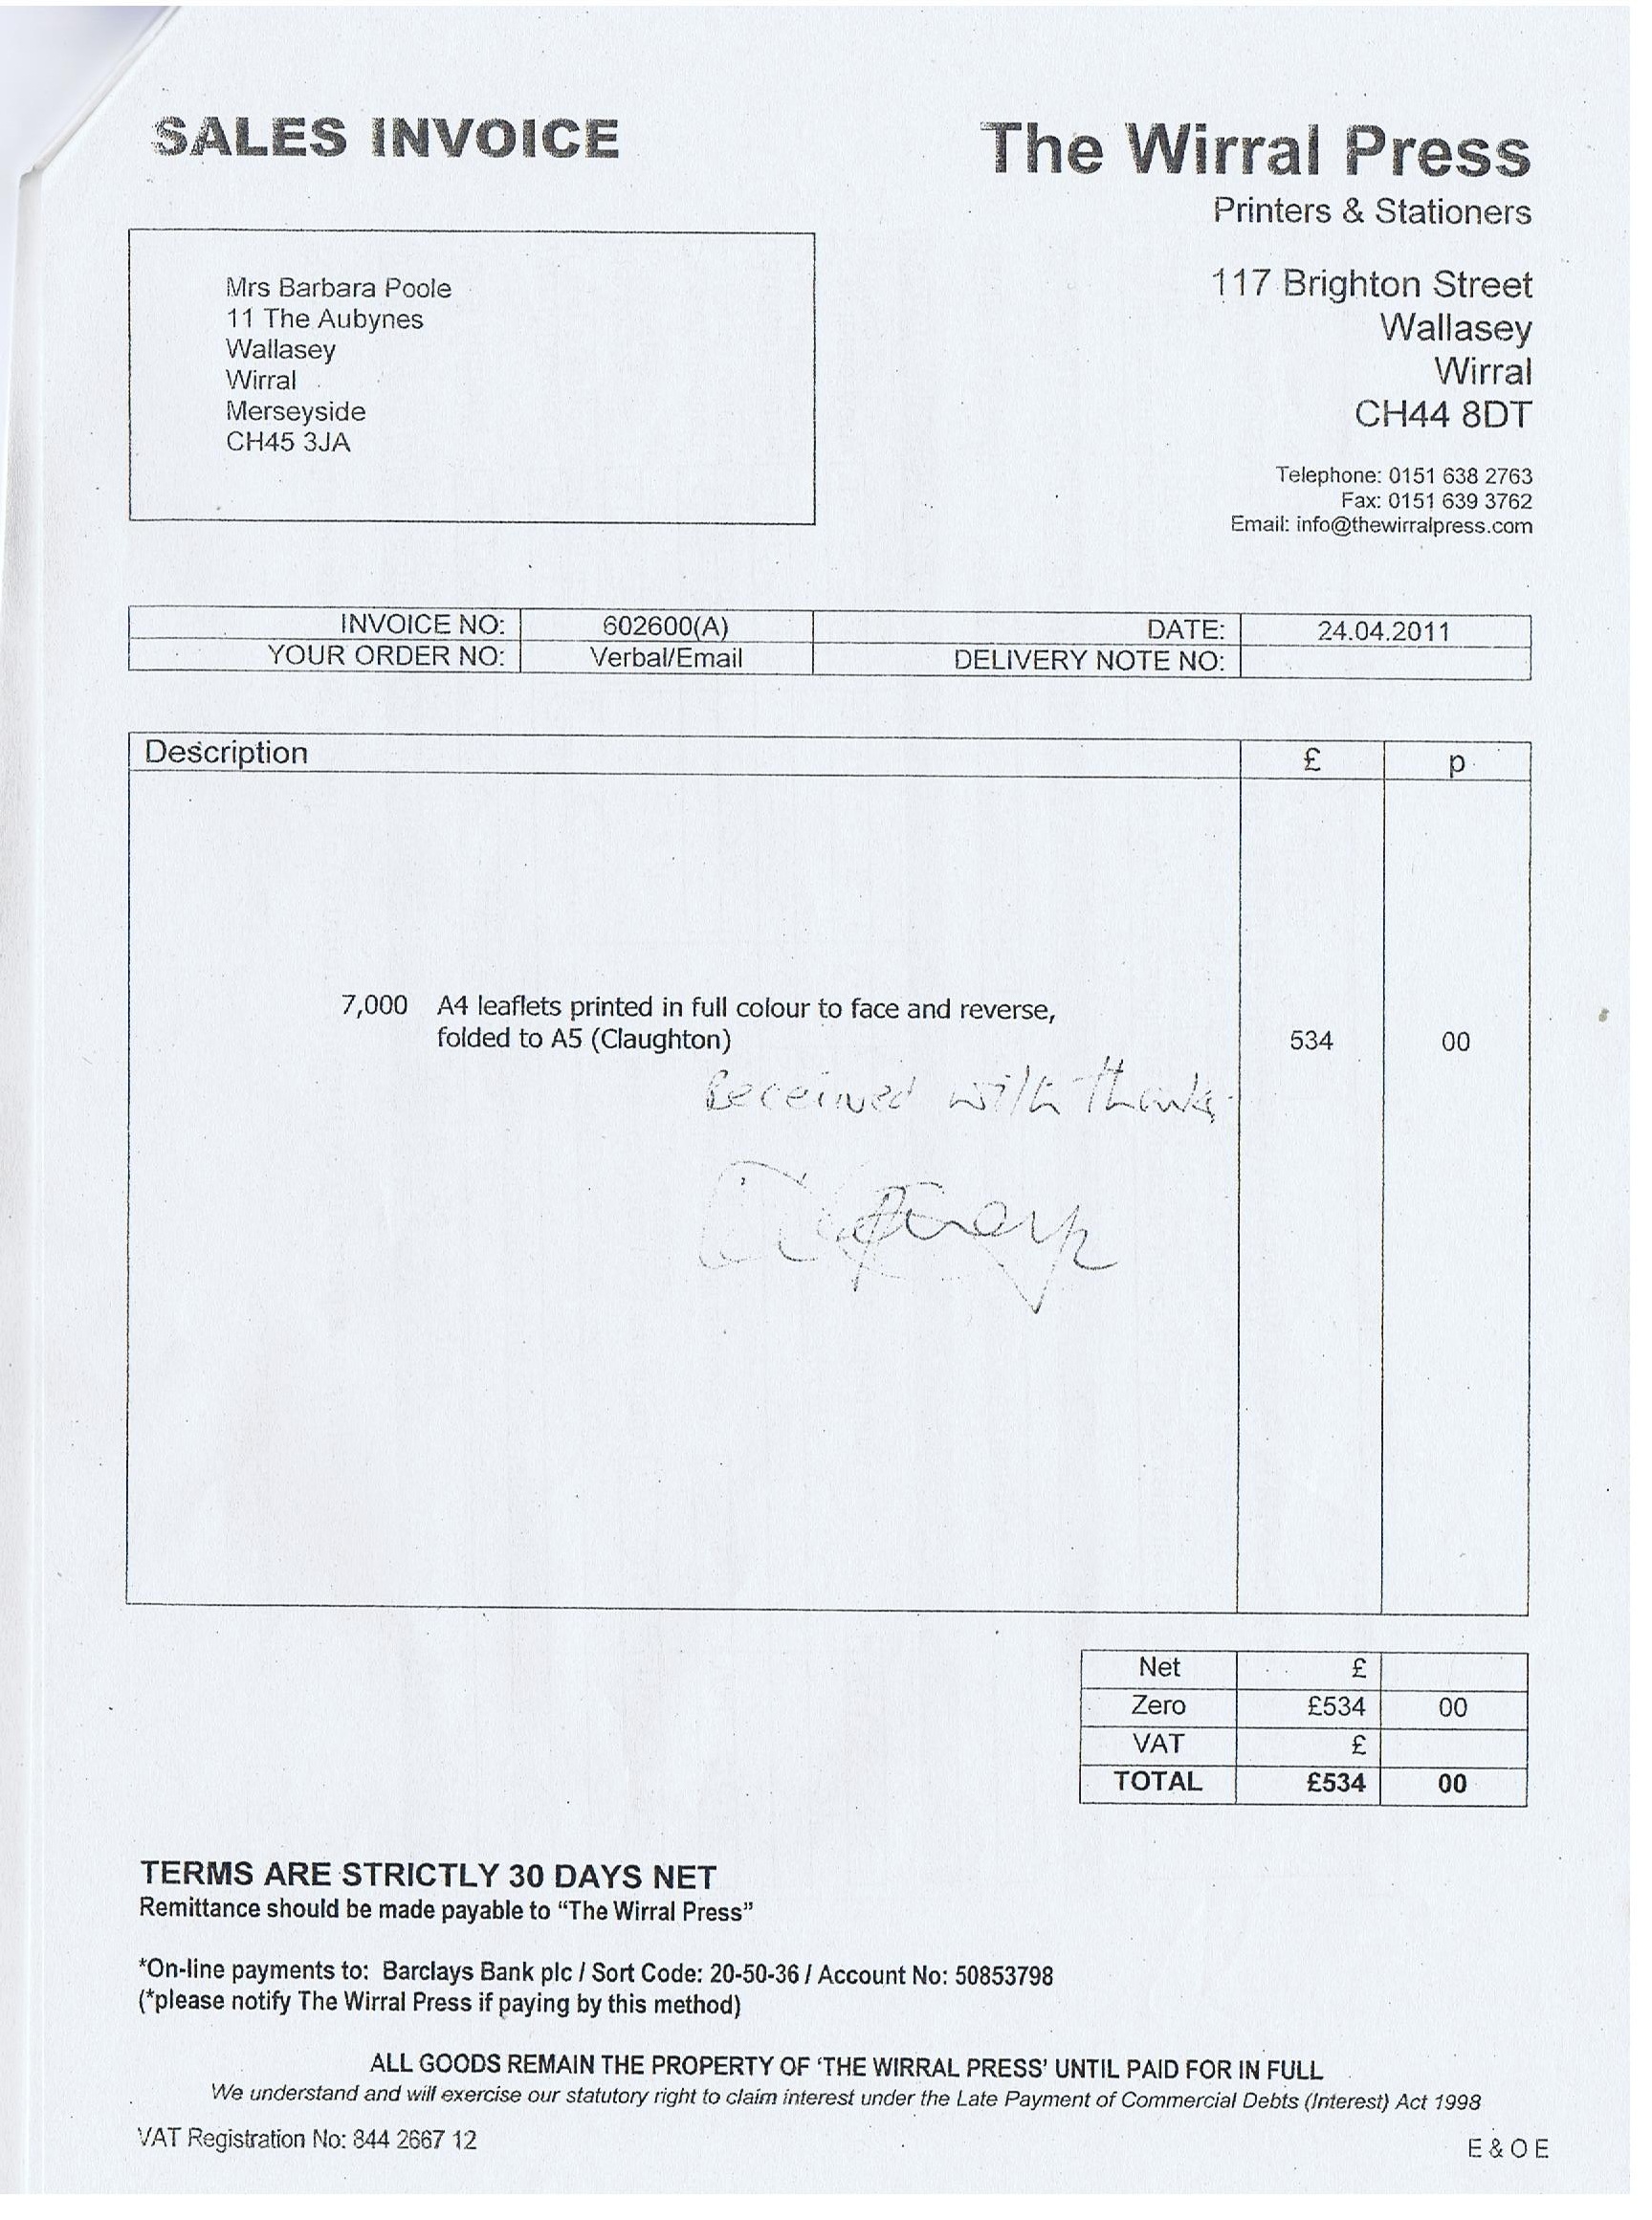 Election Expenses Barbara Sinclair Claughton ward 2011 Page 14 The Wirral Press Invoice £534 7000 A4 Colour